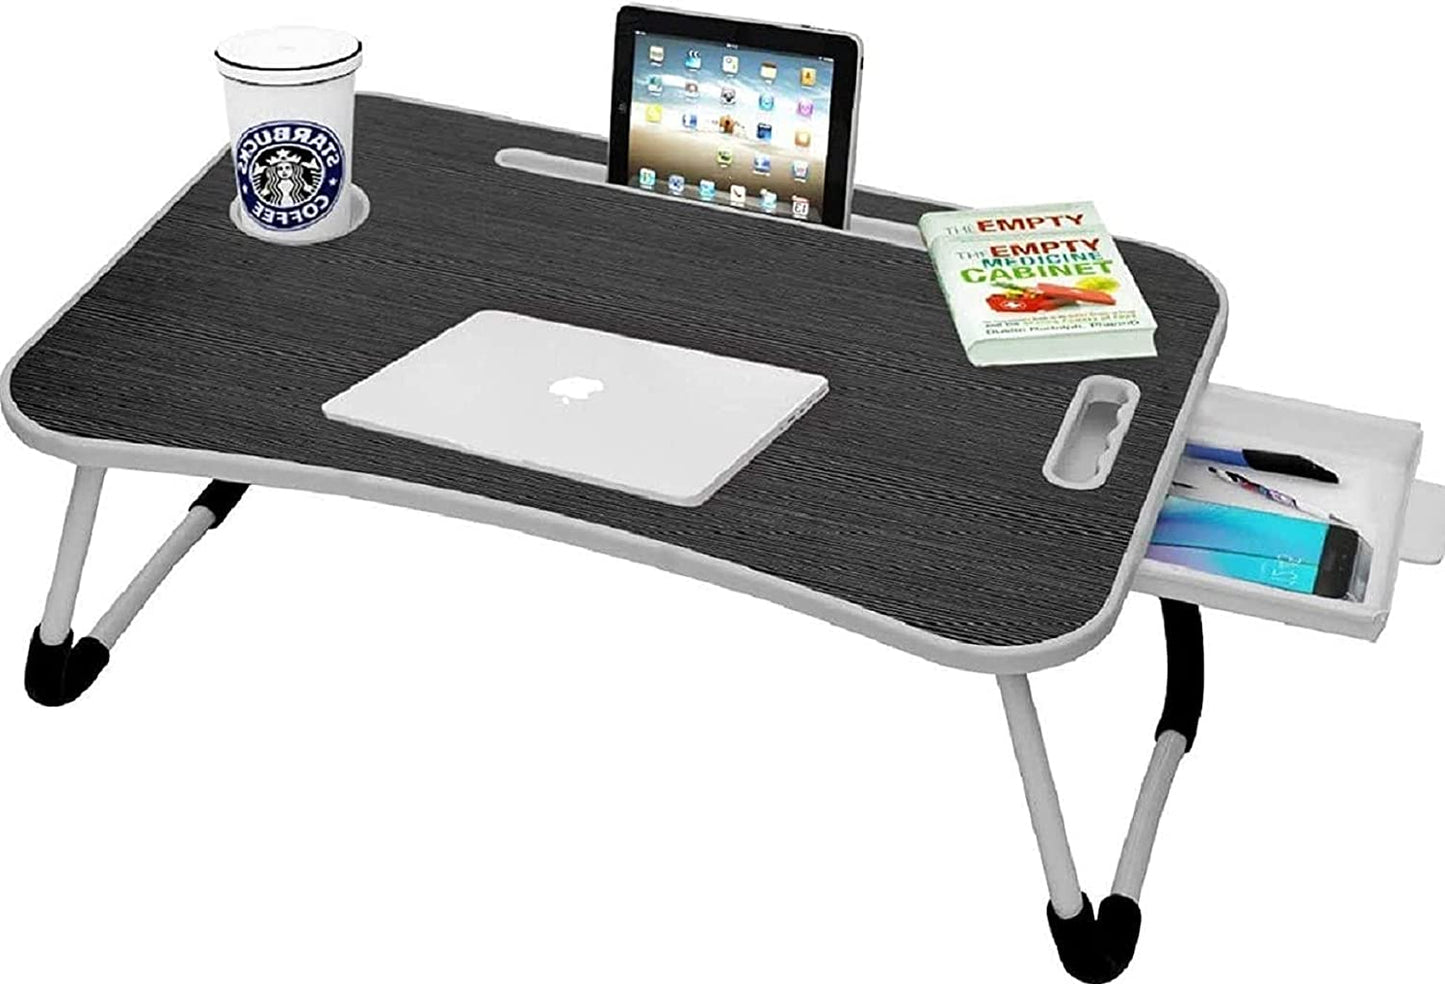 Foldable Multipurpose Laptop Table with Cup Holder | Drawer